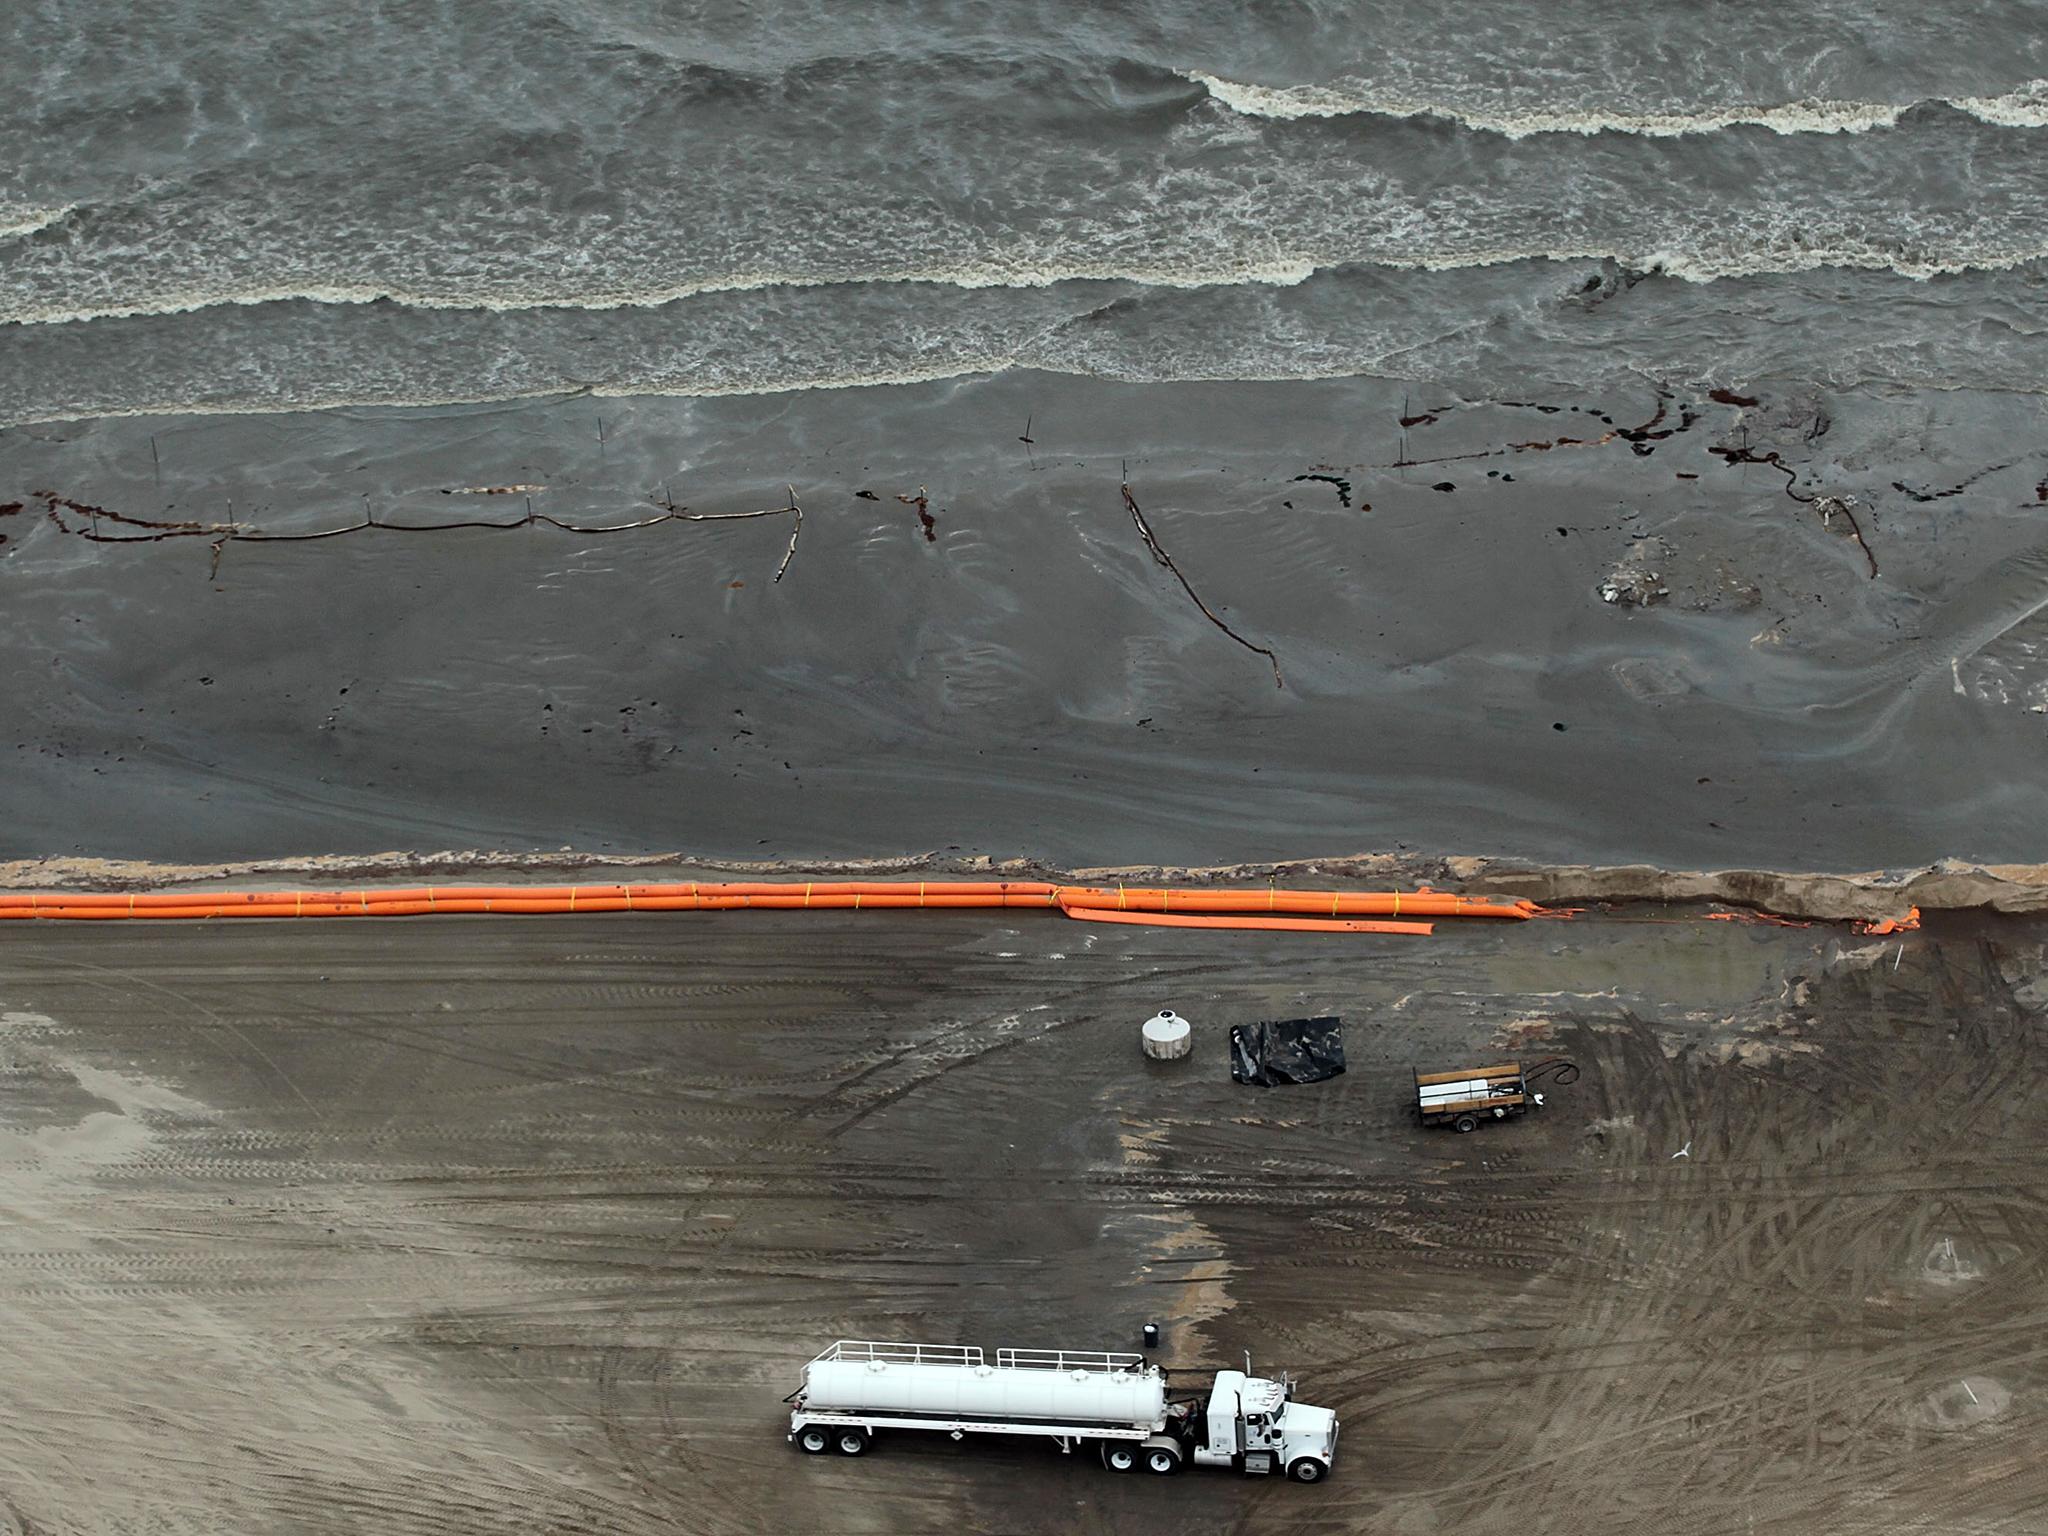 Oily absorbent material and containment booms are placed on the beach in efforts to clean up the oil spill